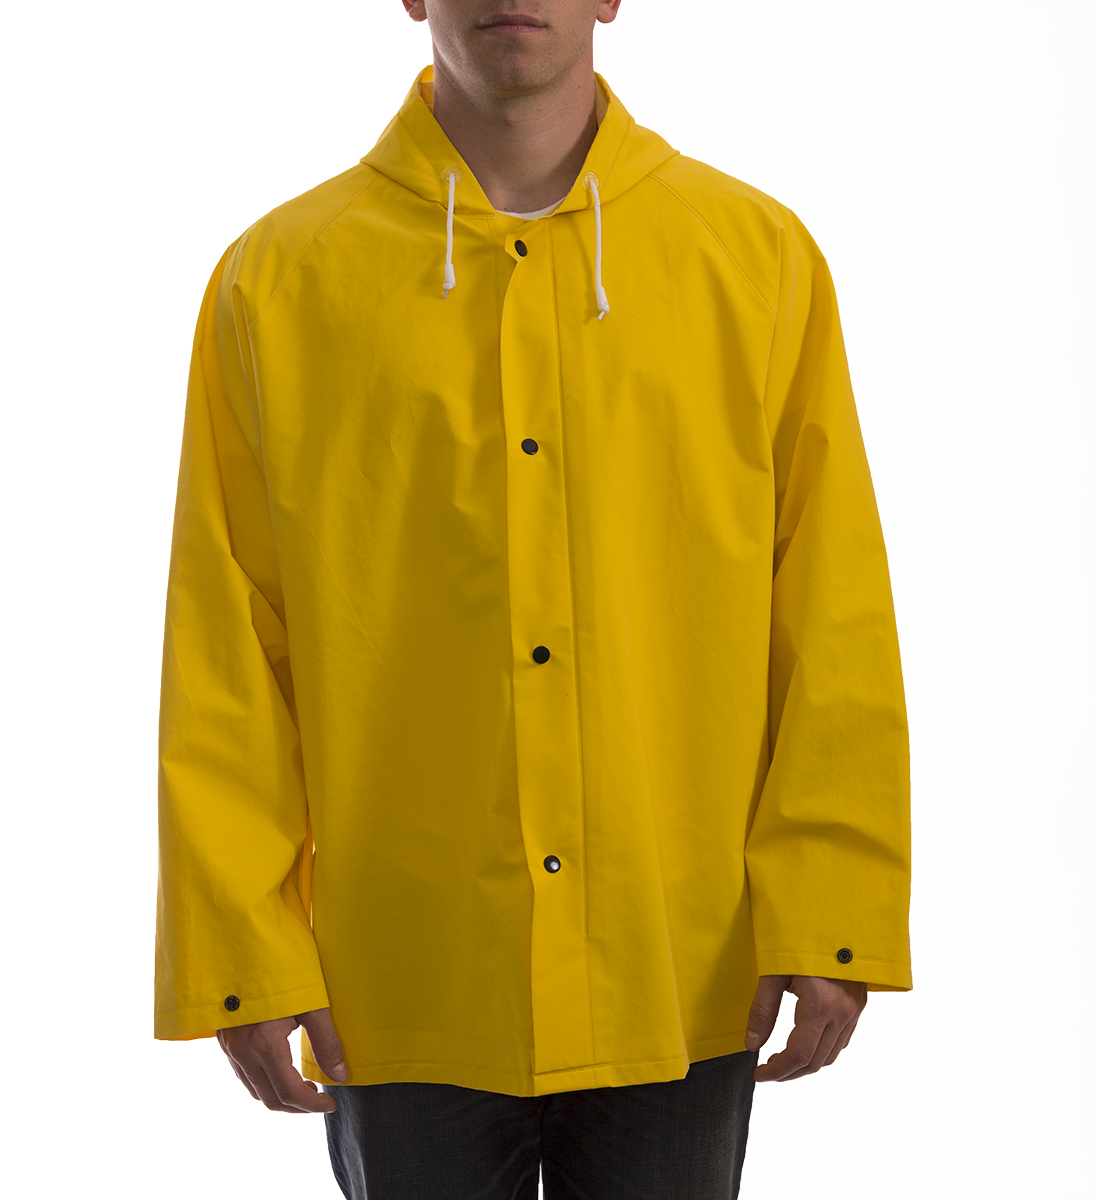 Industrial Yellow Work Jacket with Attached Hood - Spill Control